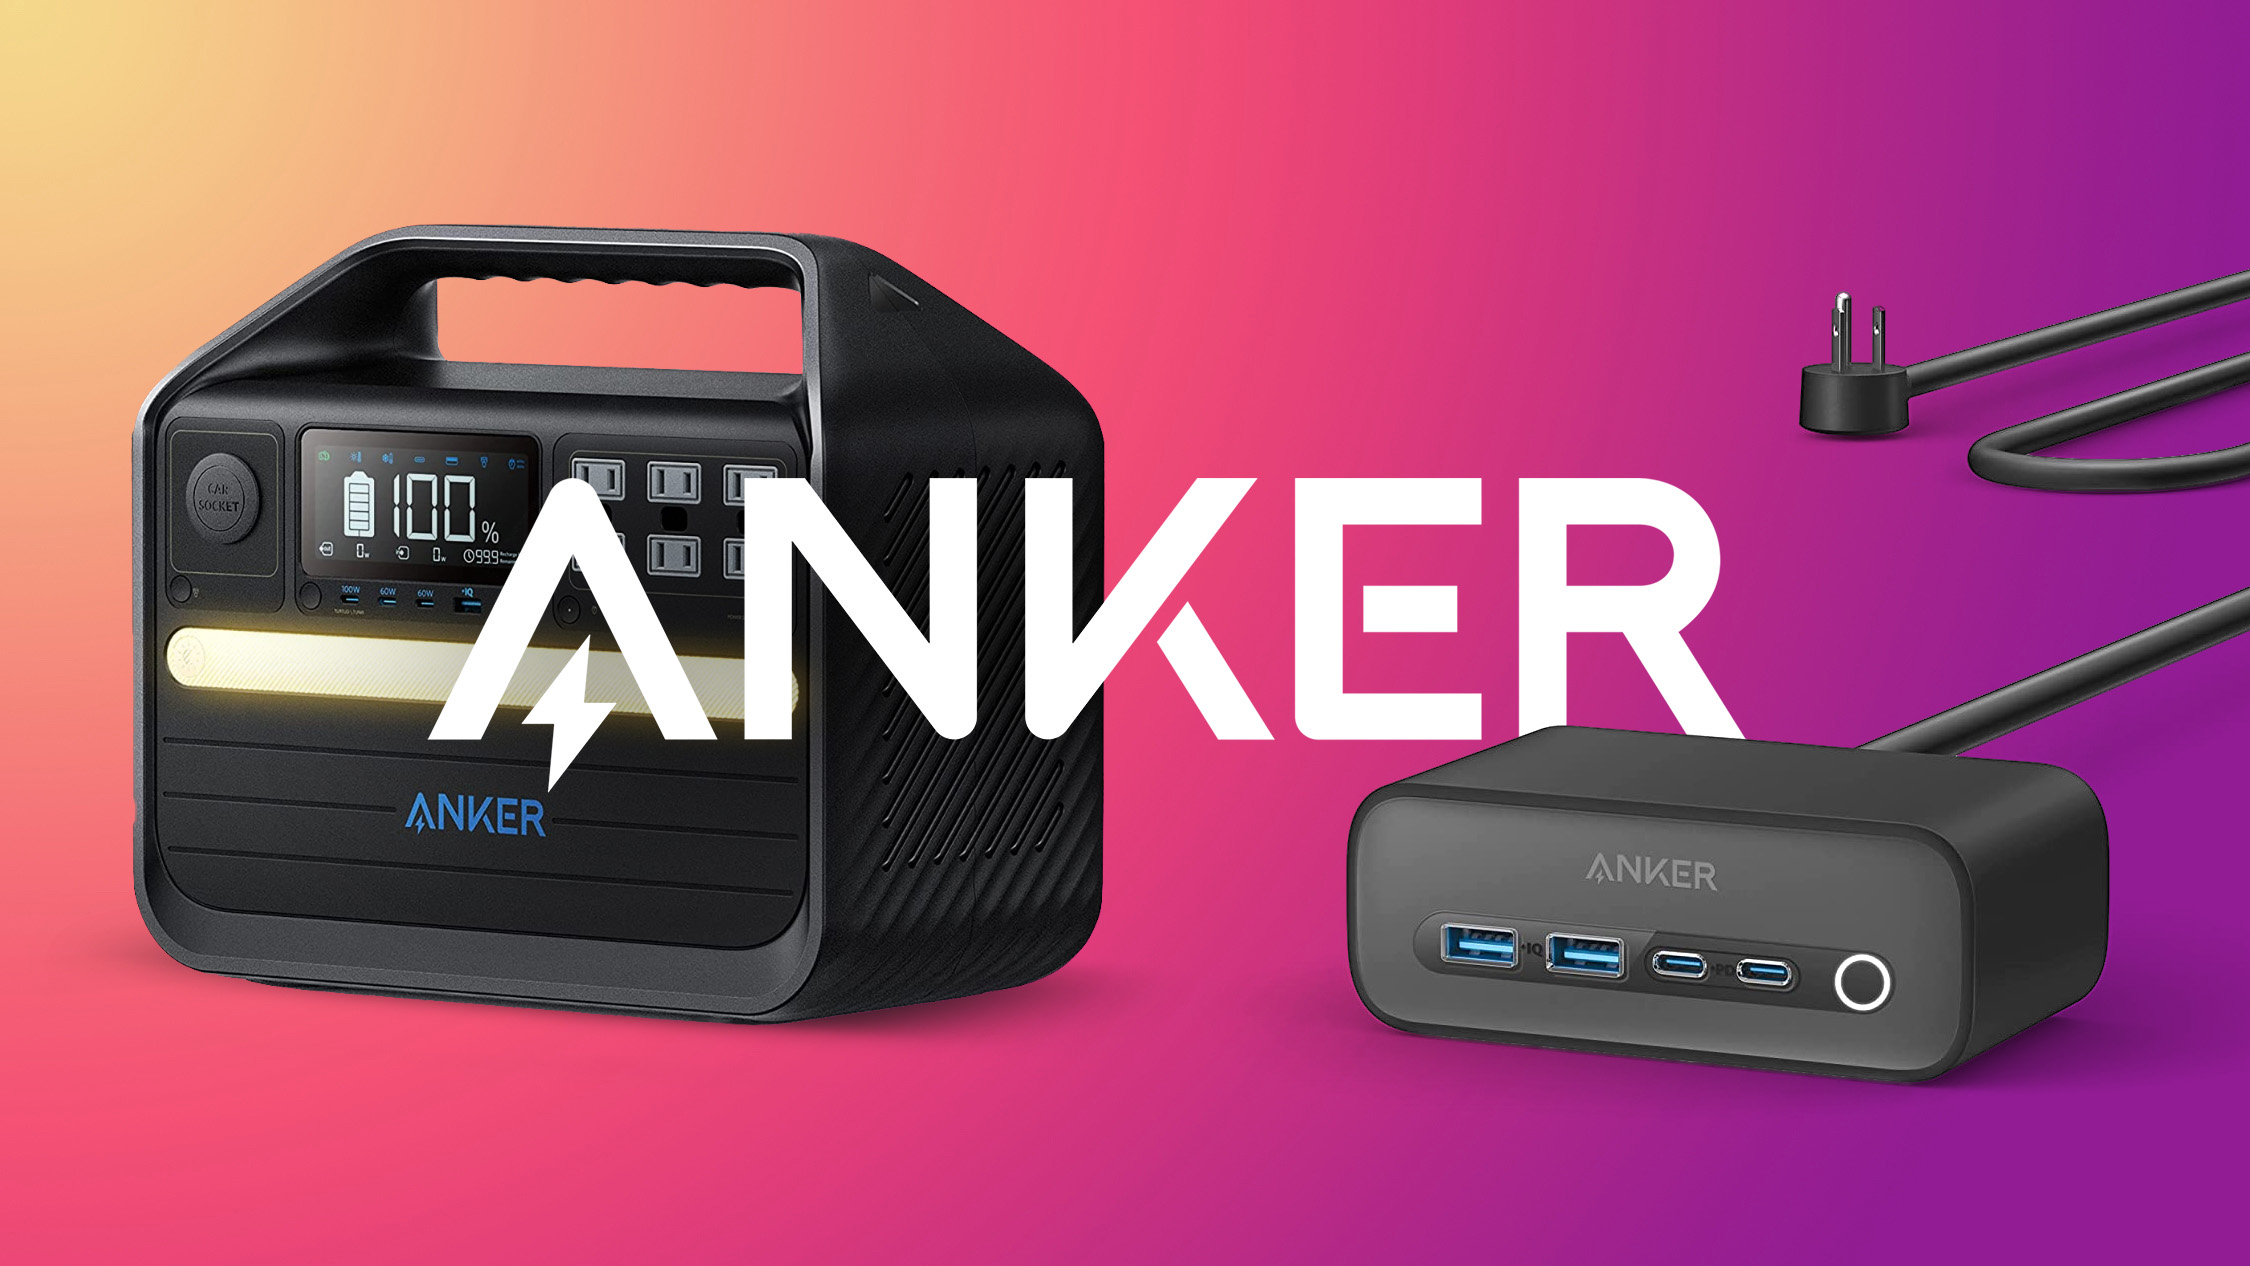 Deals: Save on Anker’s Best USB-C Accessories, Portable Batteries, Bluetooth Speakers, and More on Amazon